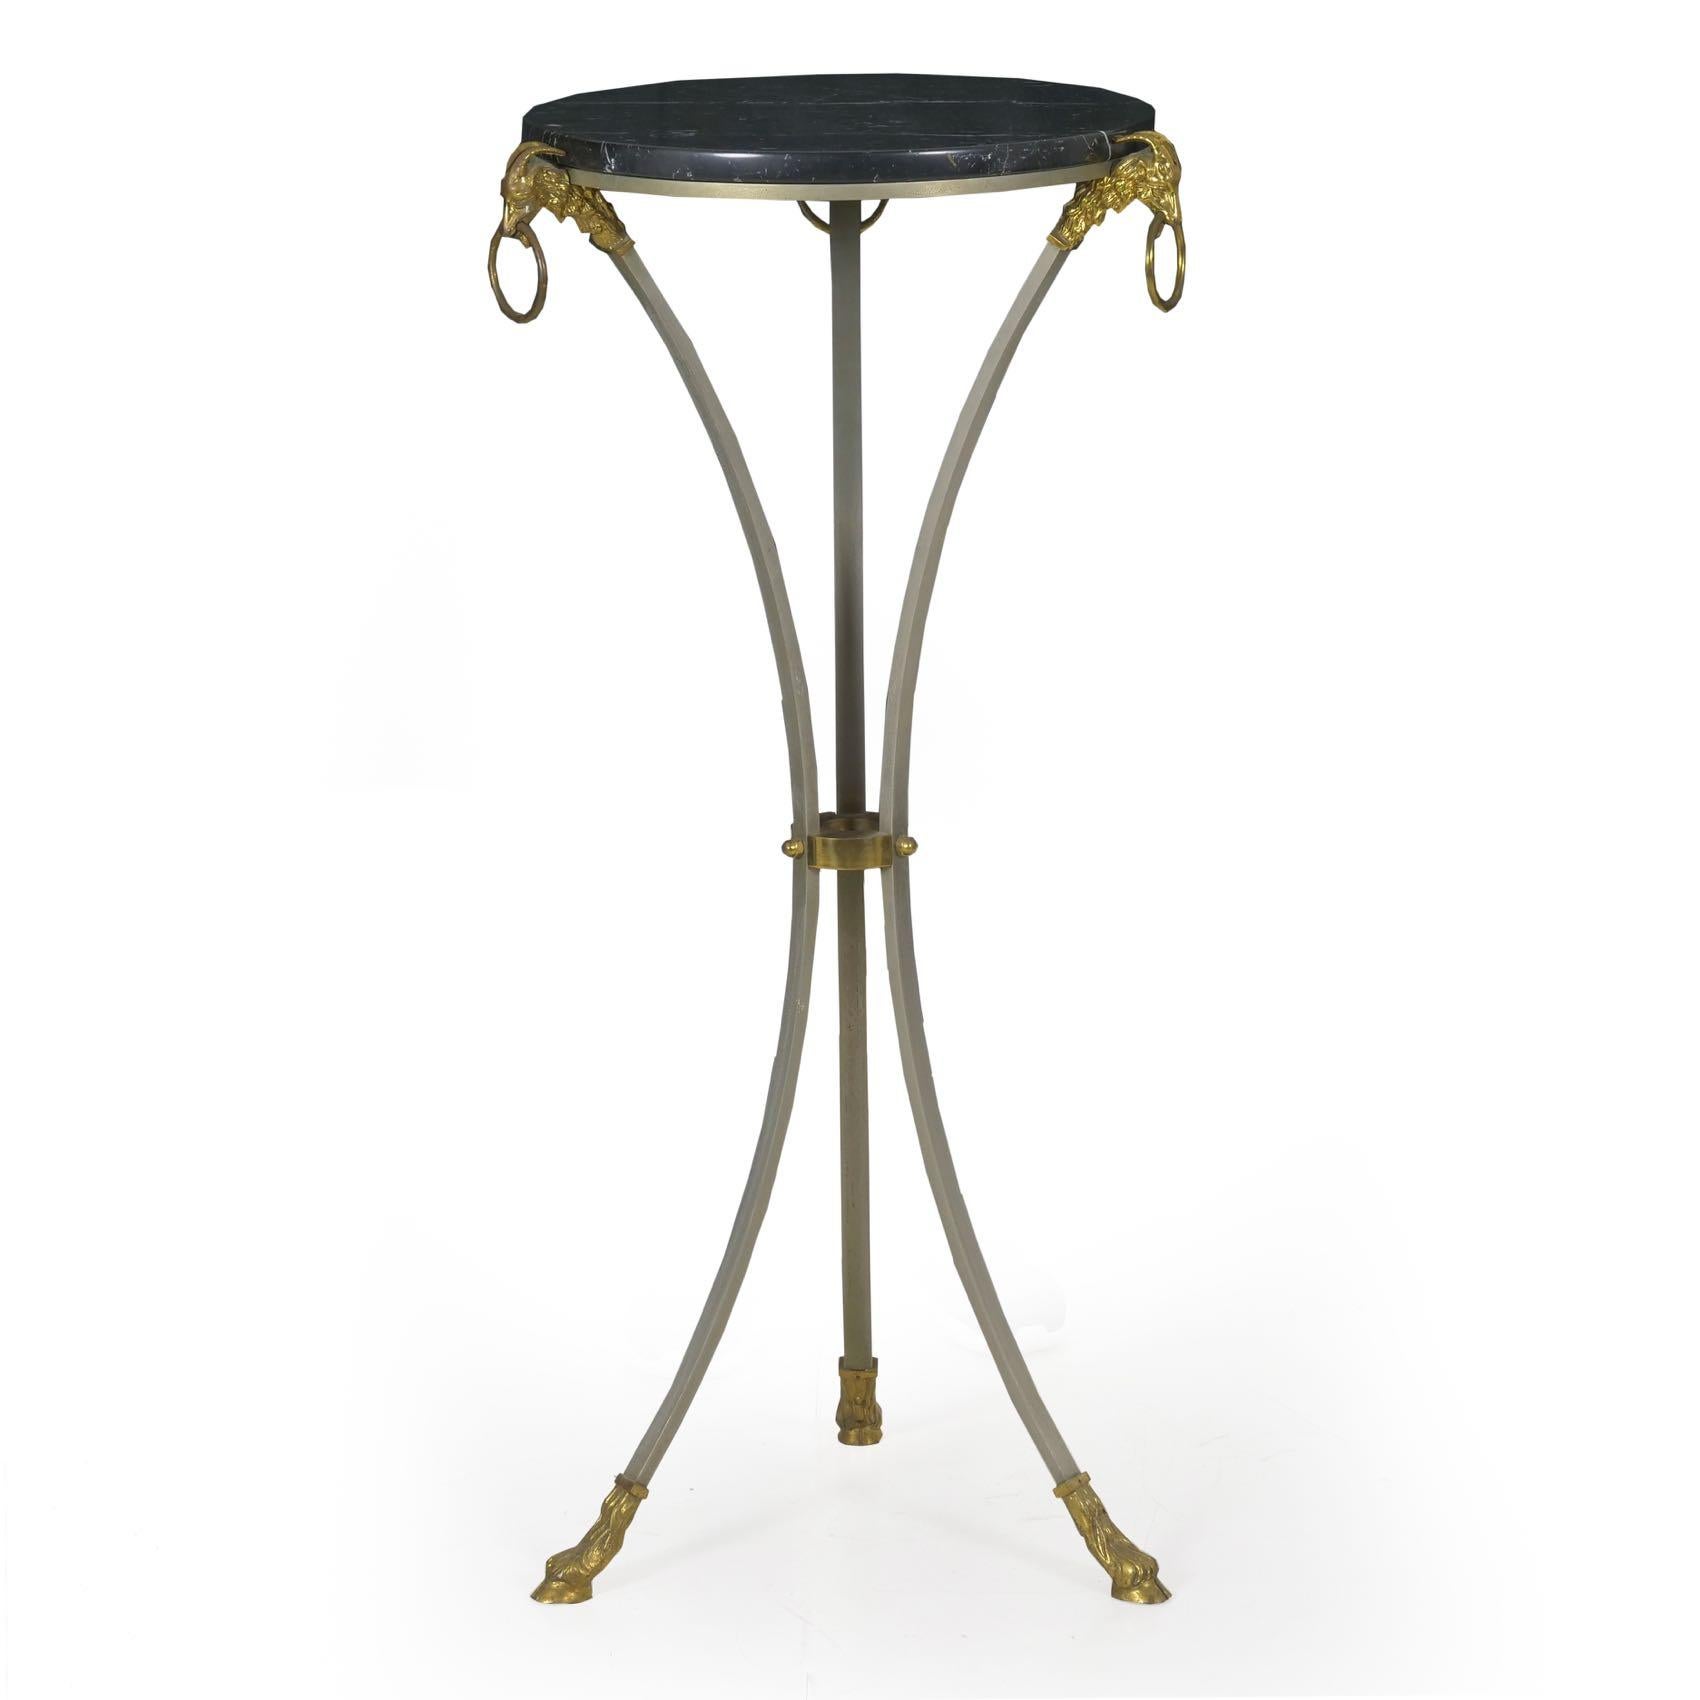 FRENCH NEOCLASSICAL STEEL, BRASS AND MARBLE ACCENT TABLE
Manner of Maison Jansen, circa mid 20th century
Item # 905WGQ20P 

A sleek and striking accent table, the height allows it to function both as a plant stand or as a pedestal as well. The rich